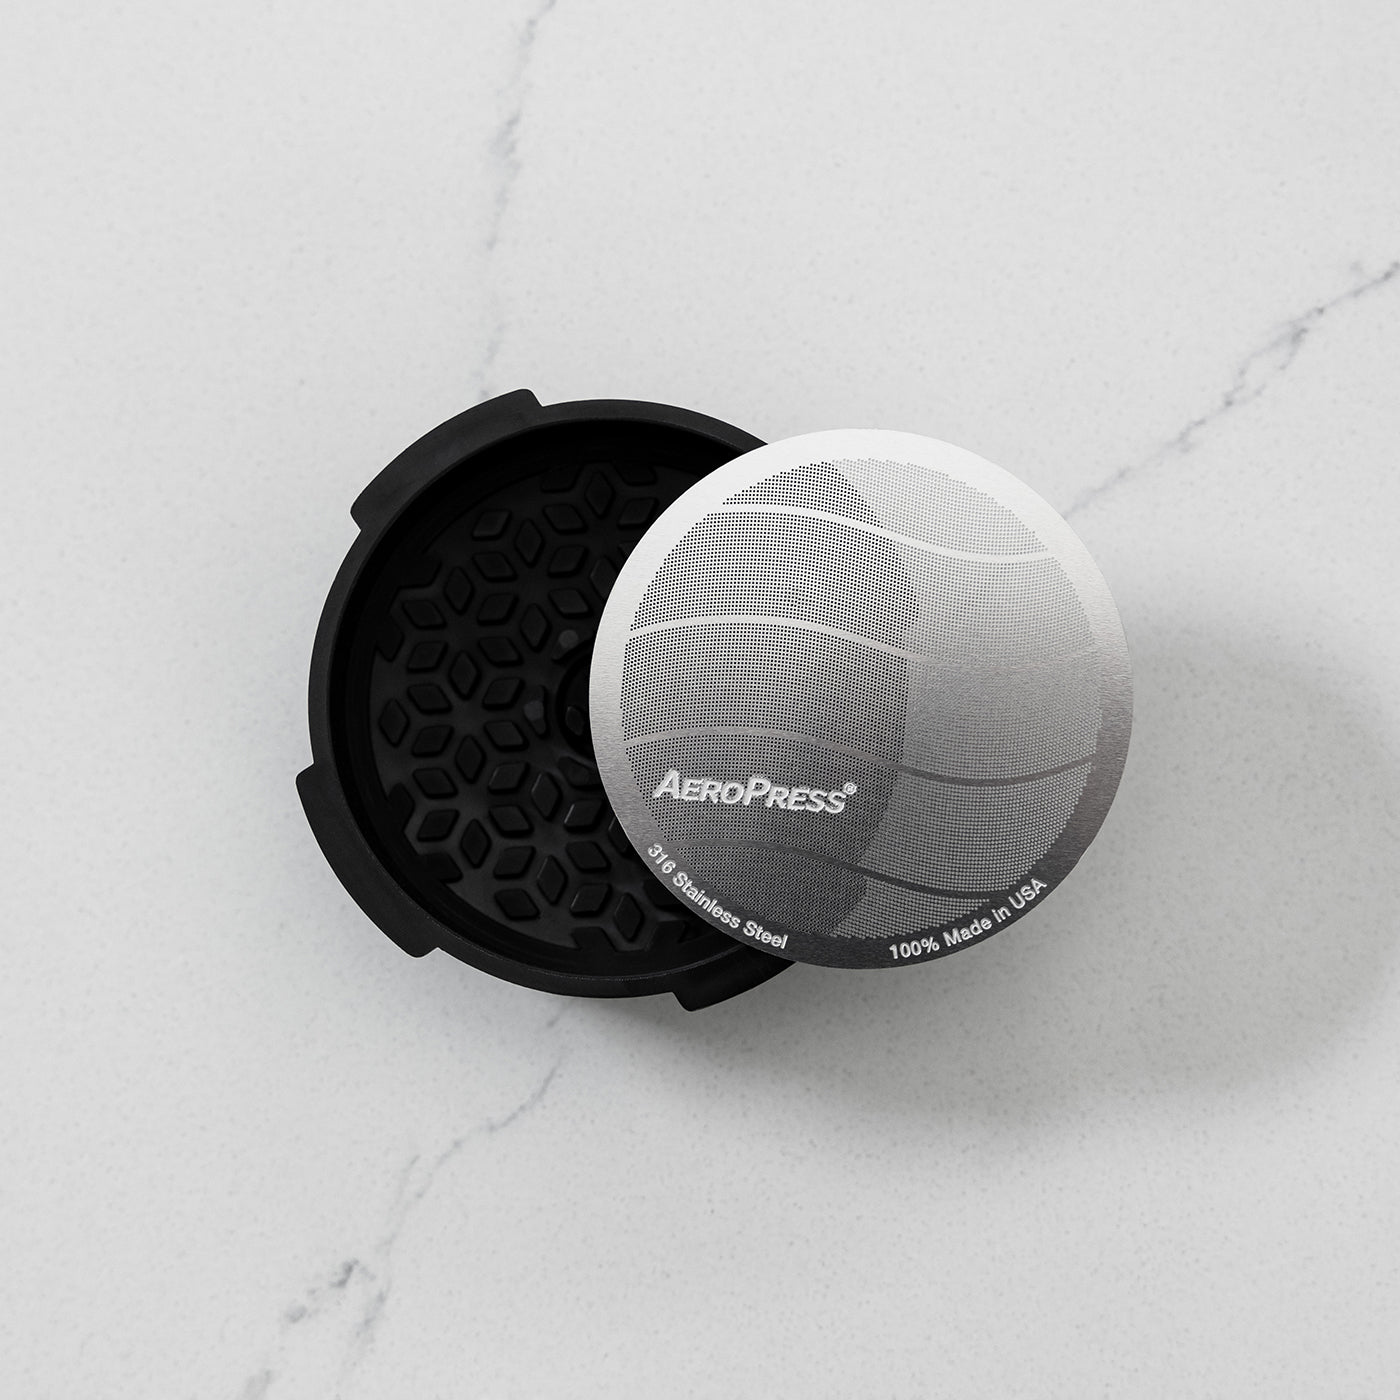 AeroPress Flow Control Filter Cap with metal filter on marble counter